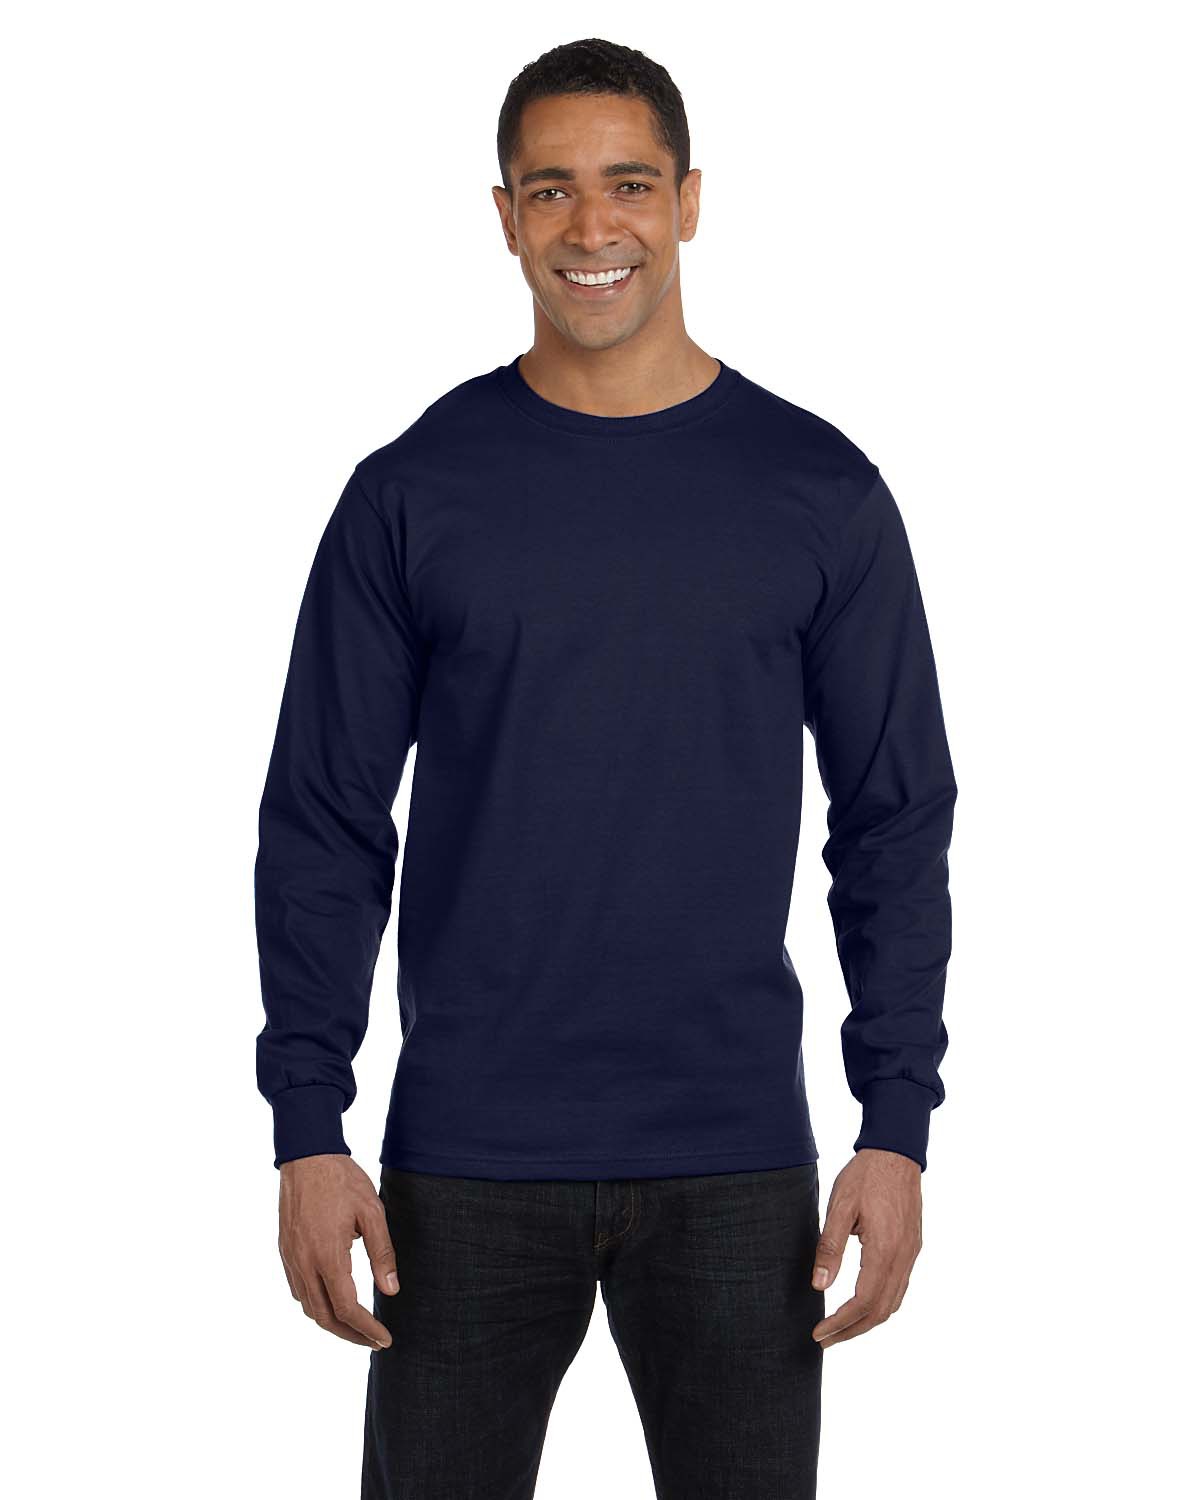 Hanes Beefy Long Sleeve with logo option